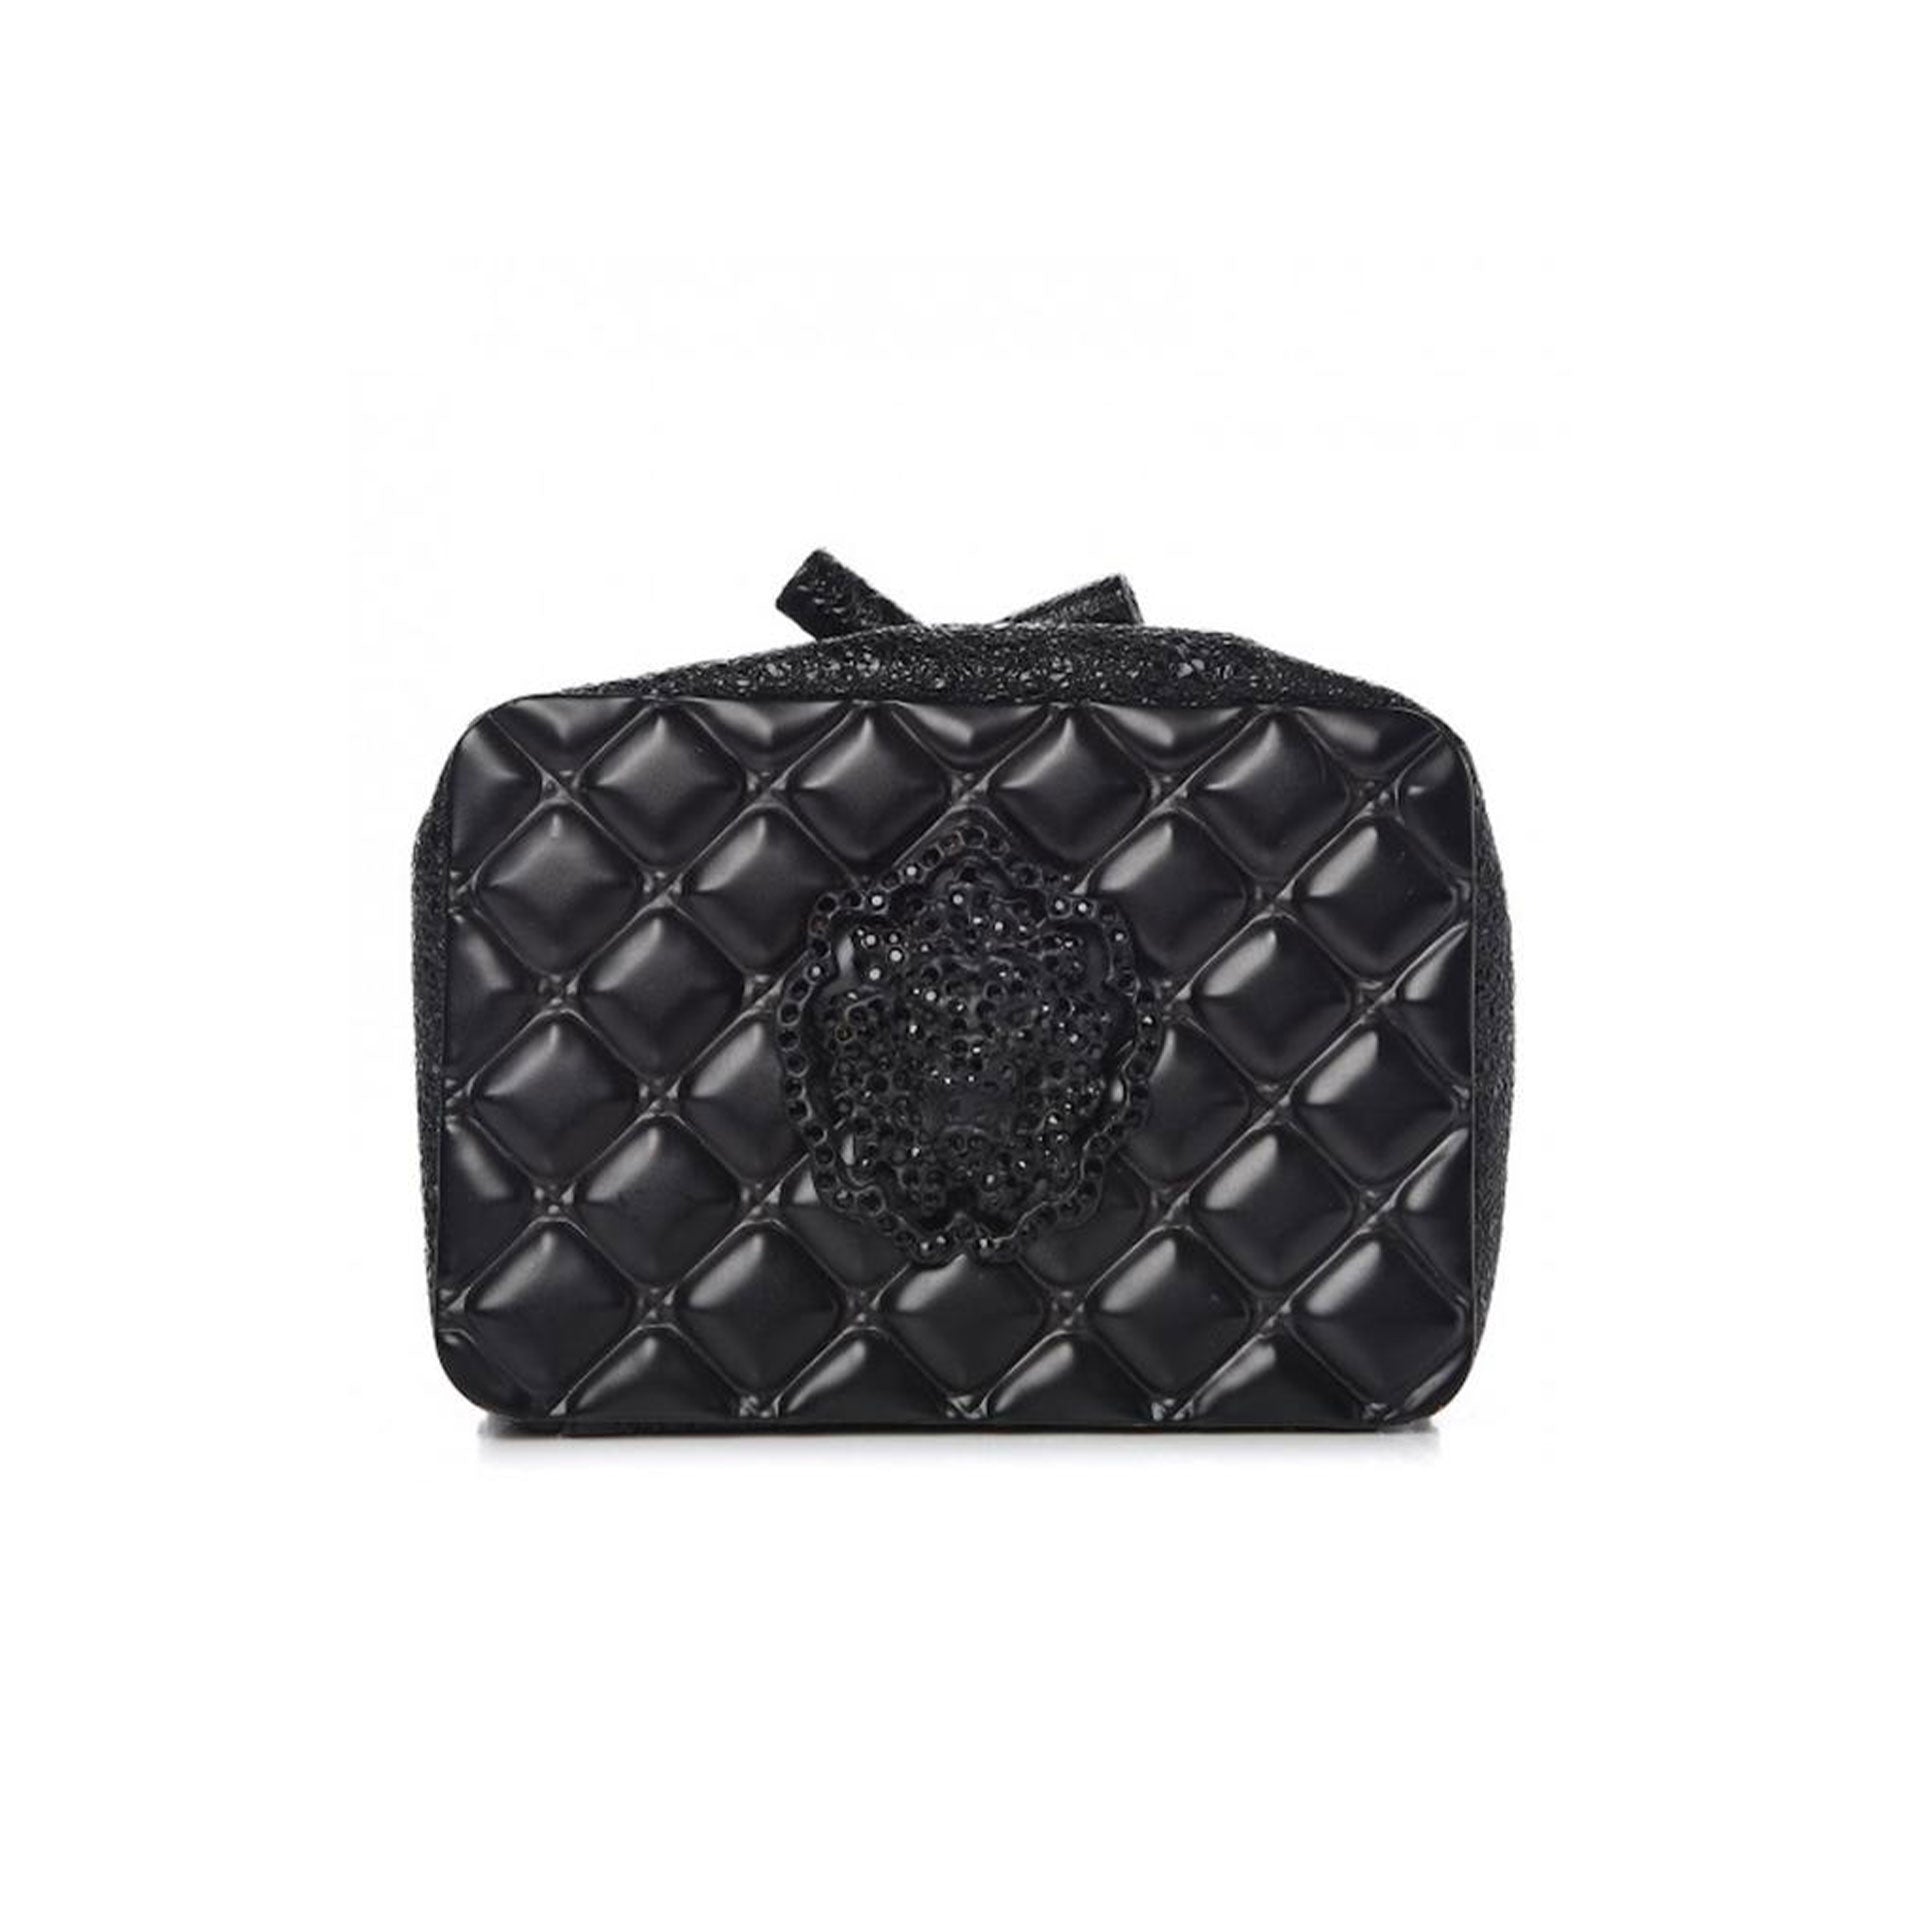 Very Rare Minaudiere Chanel Moscow Lion Head Clutch For Sale at 1stDibs